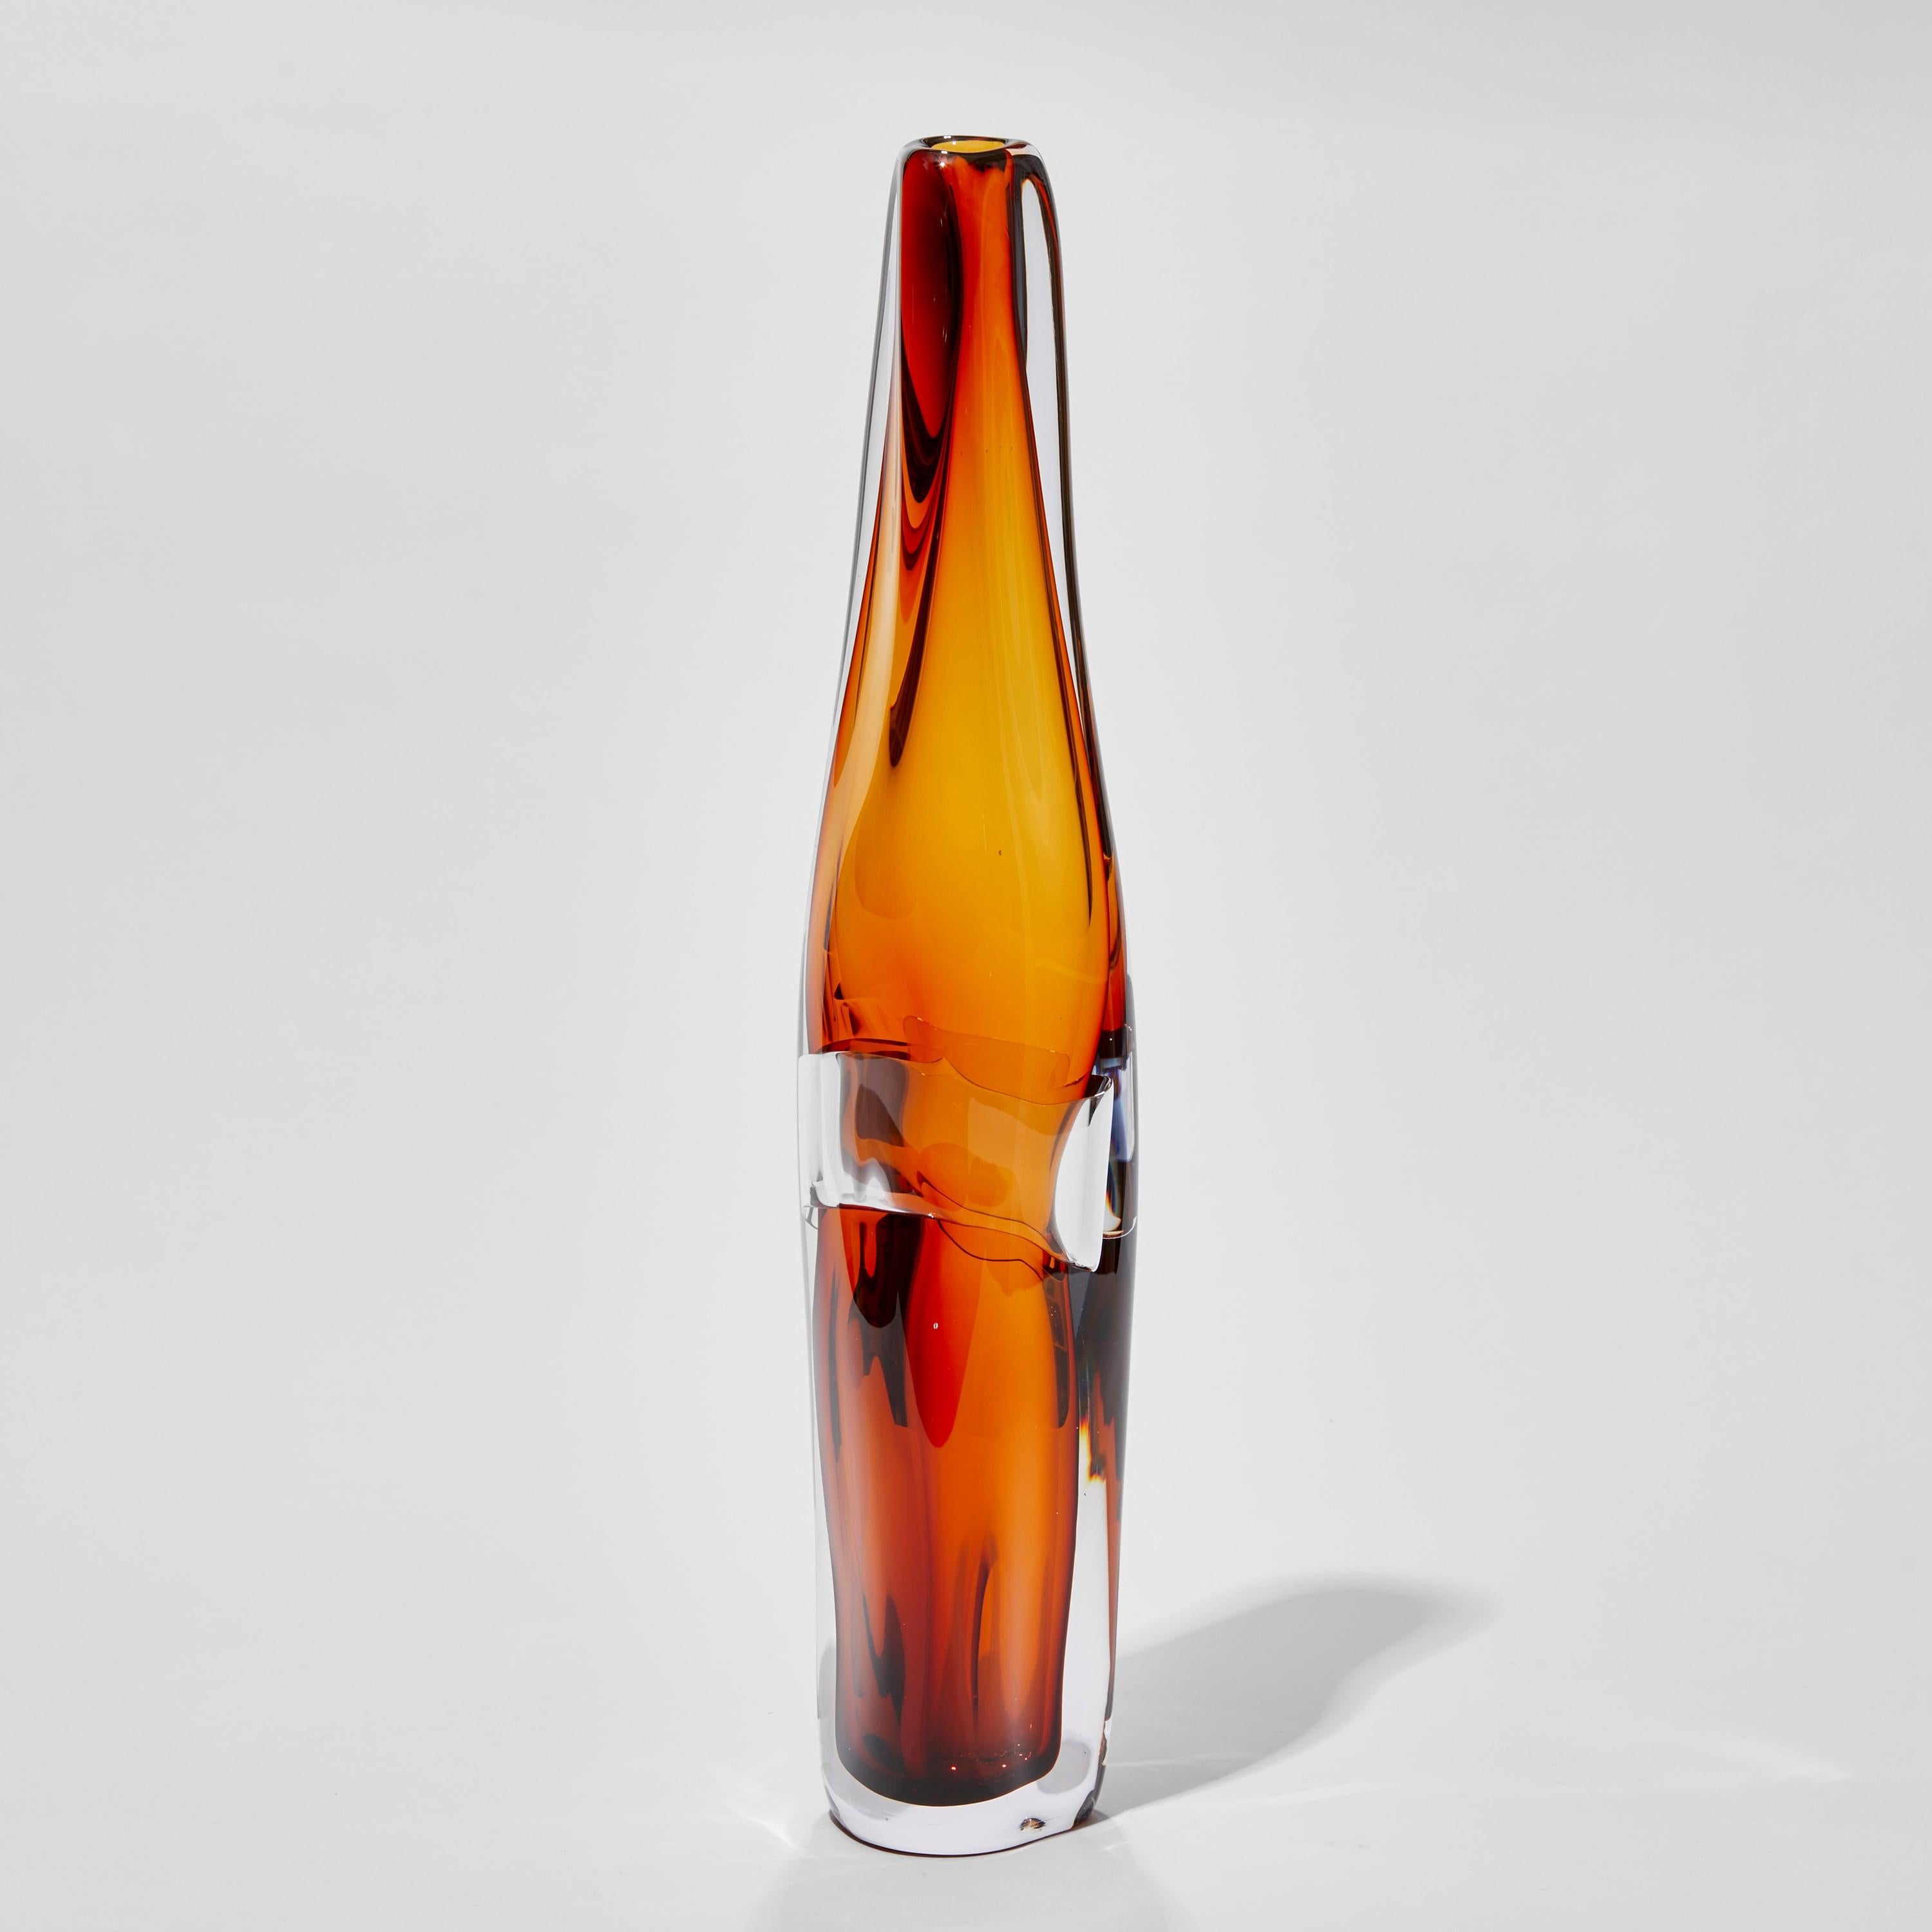 'Sommarial in Aurora Gelblich' is a unique handblown sculptural glass vessel by the British artist, Vic Bamforth.

Bamforth is an artist who has helped to bring the highly demanding graal technique into the 21st century. He combines hand-painting